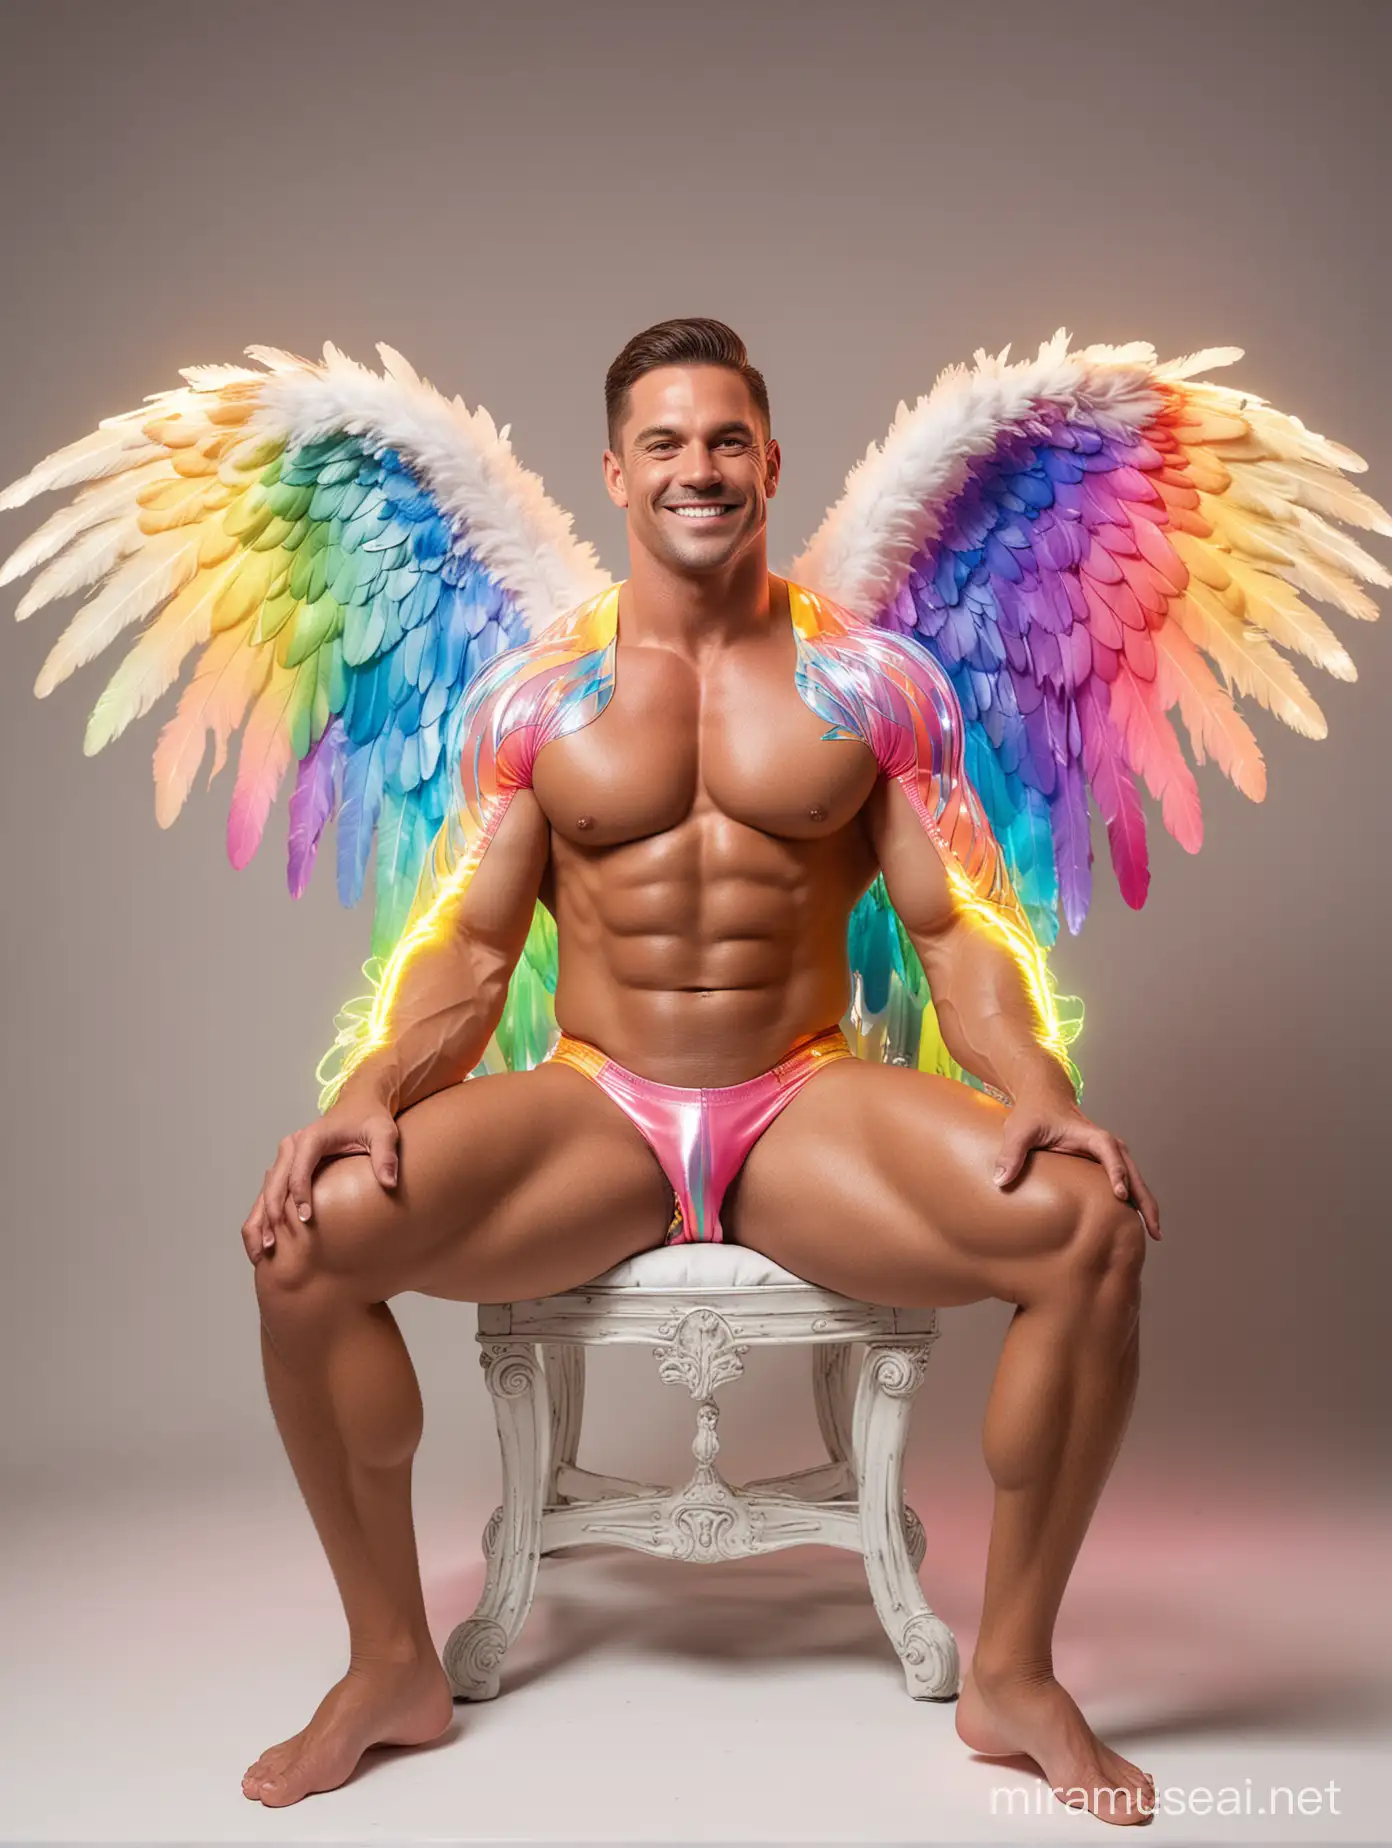 Ultra Chunky IFBB Bodybuilder Daddy with Rainbow LED Jacket Flexing on Golden Angel Chair